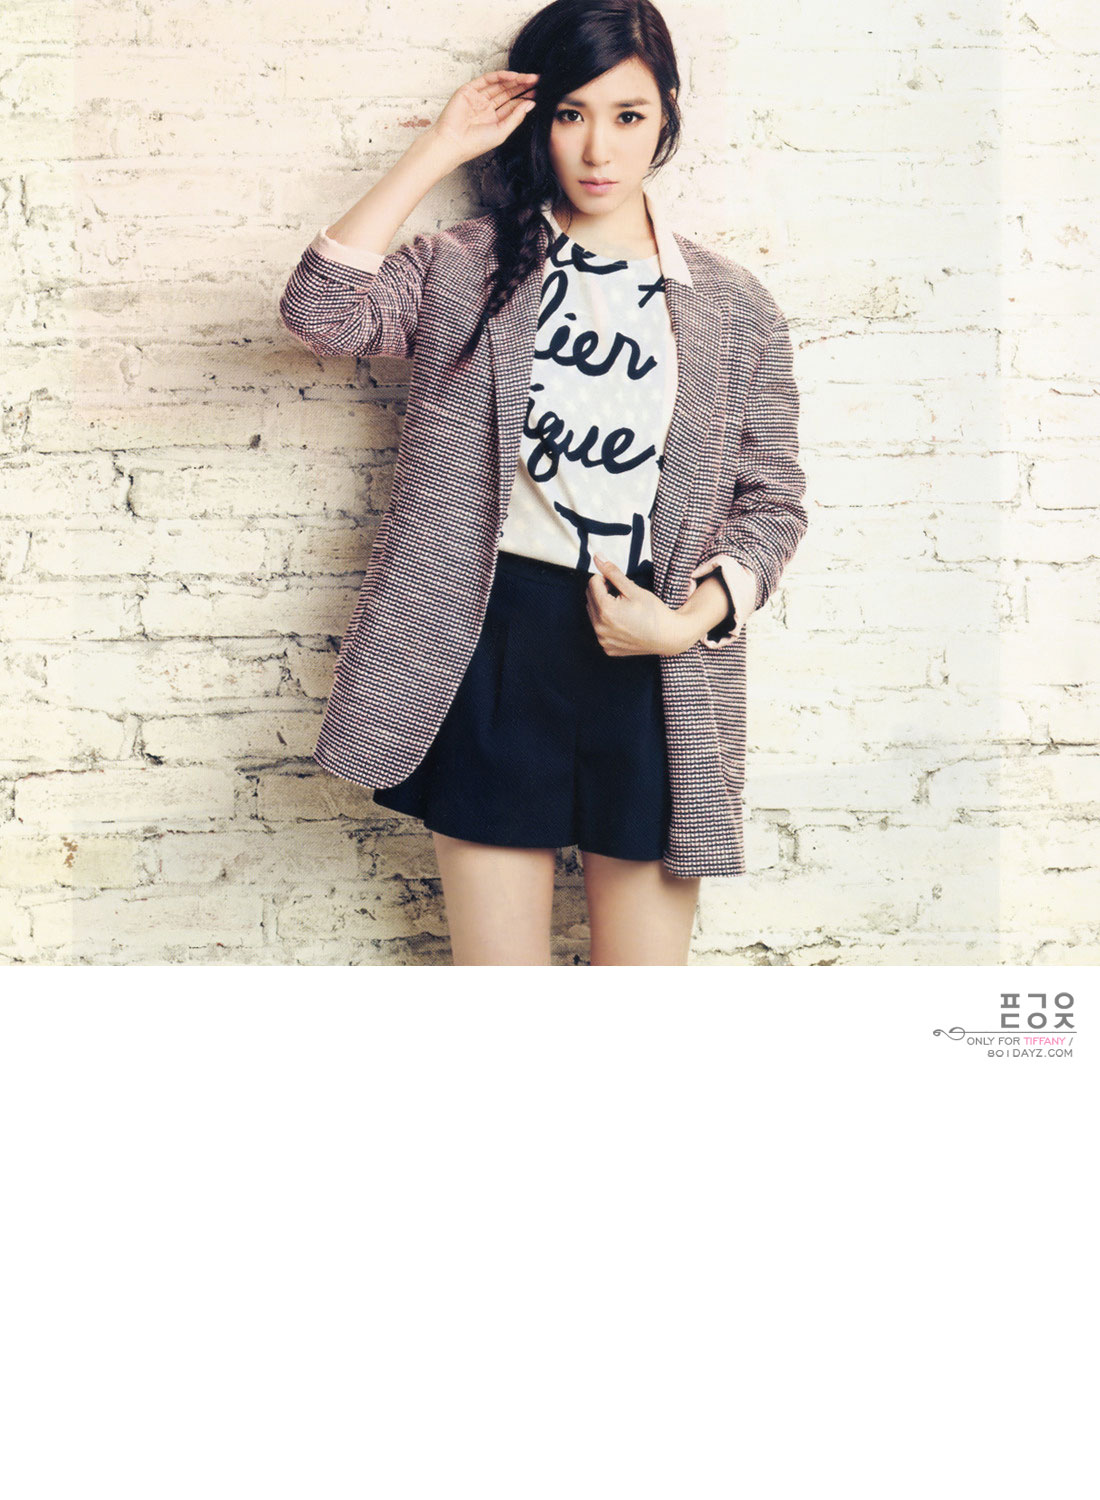 Vogue Girl in love with Tiffany